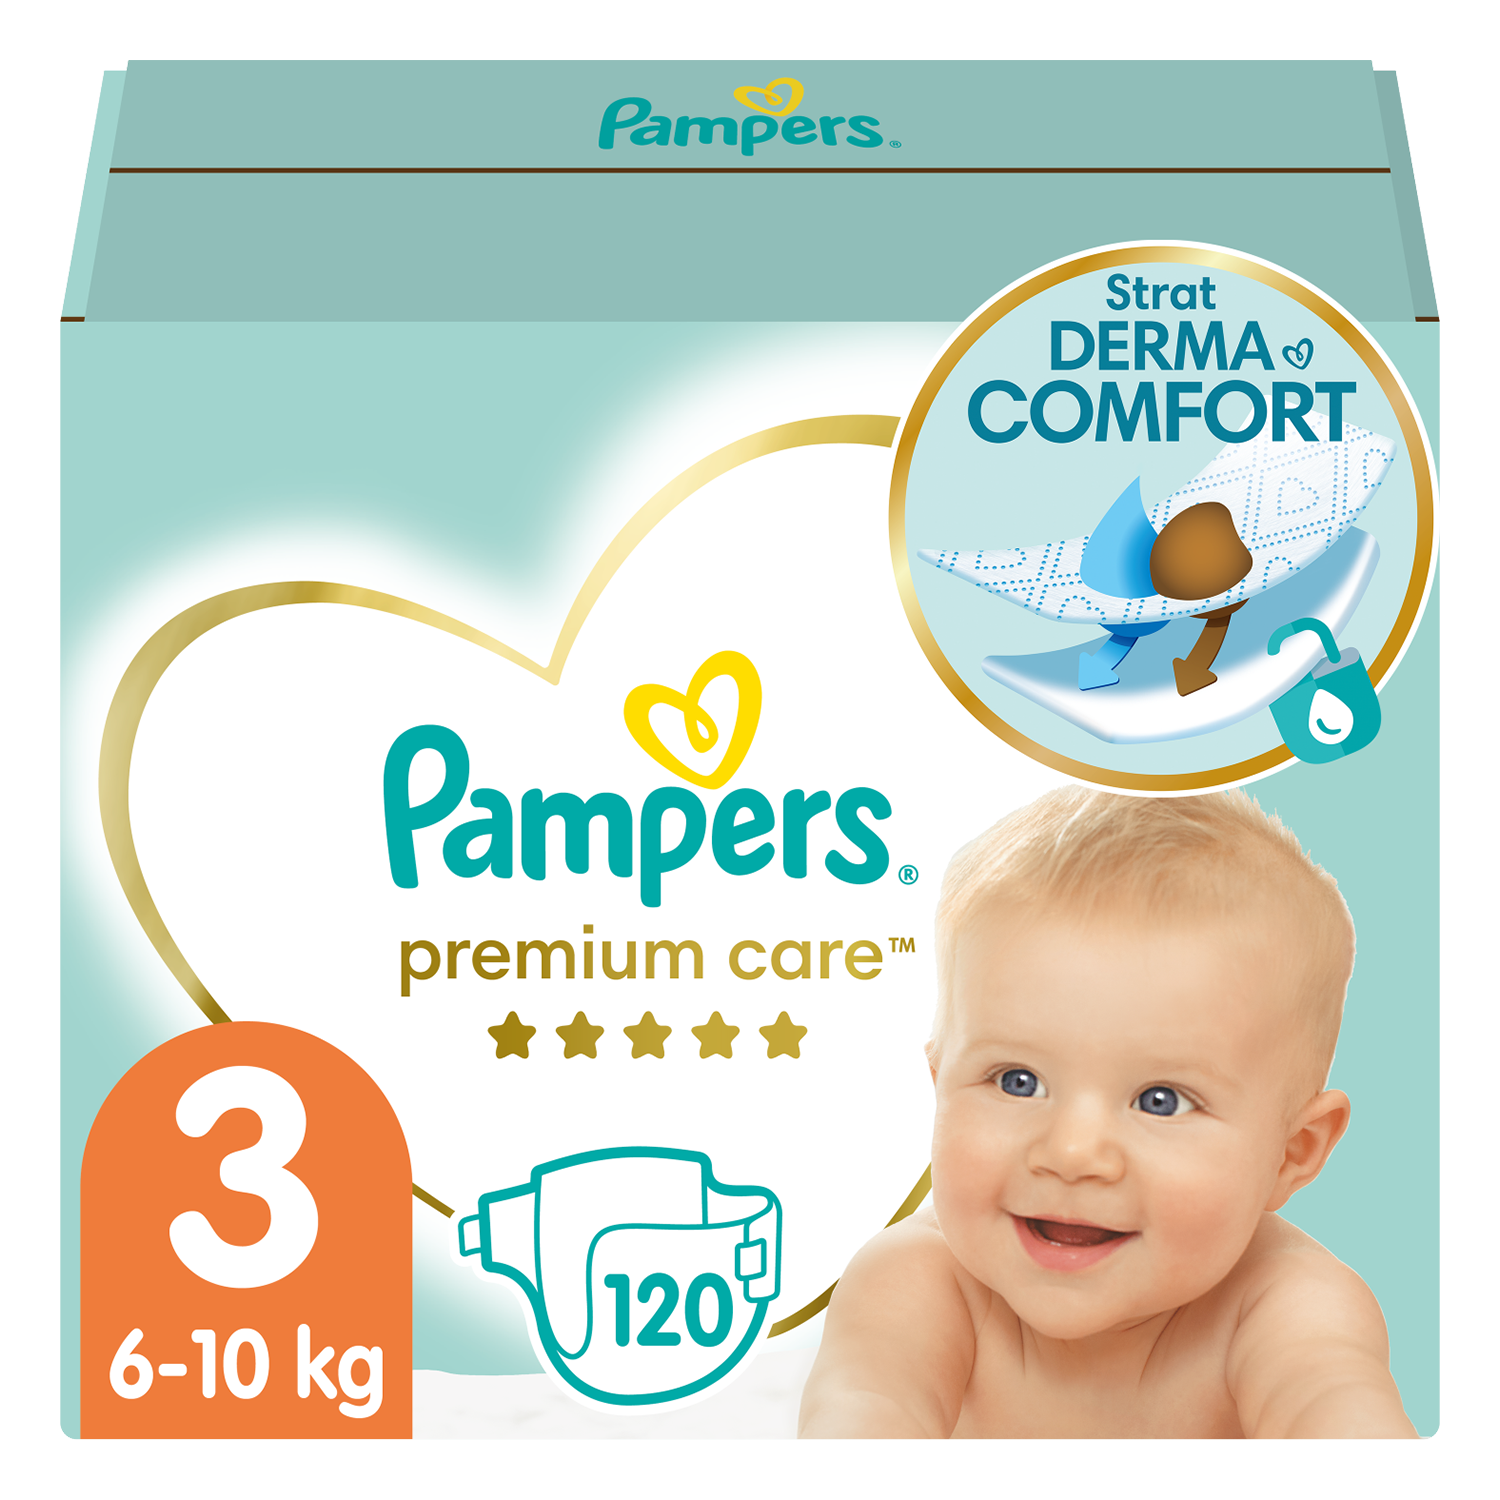 pampers active baby 3 74 szt